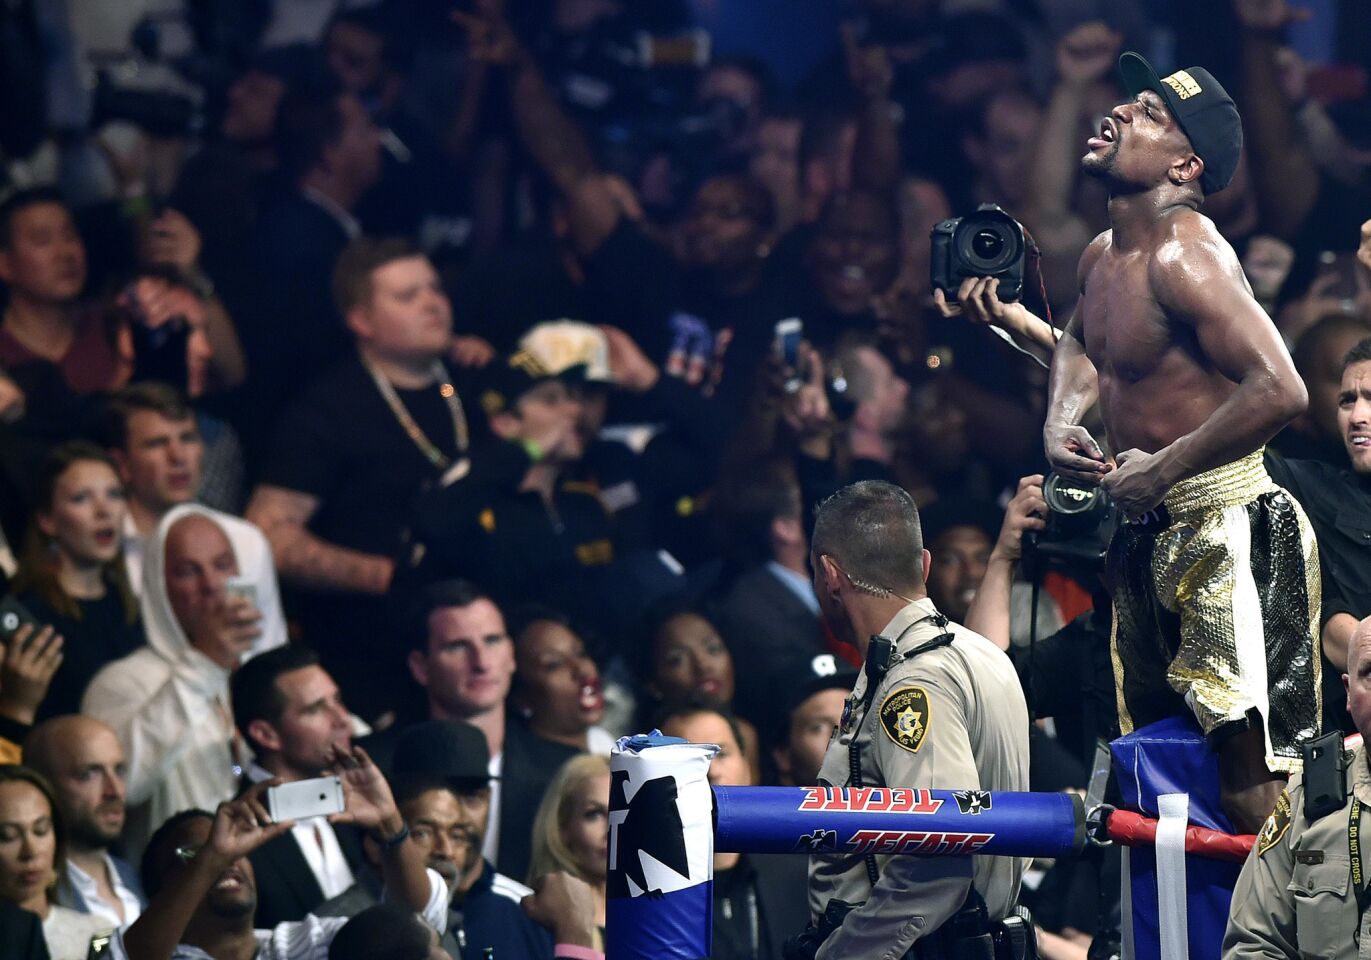 Floyd Mayweather Jr. enjoys himself after his win over Manny Pacquiao on Saturday night.